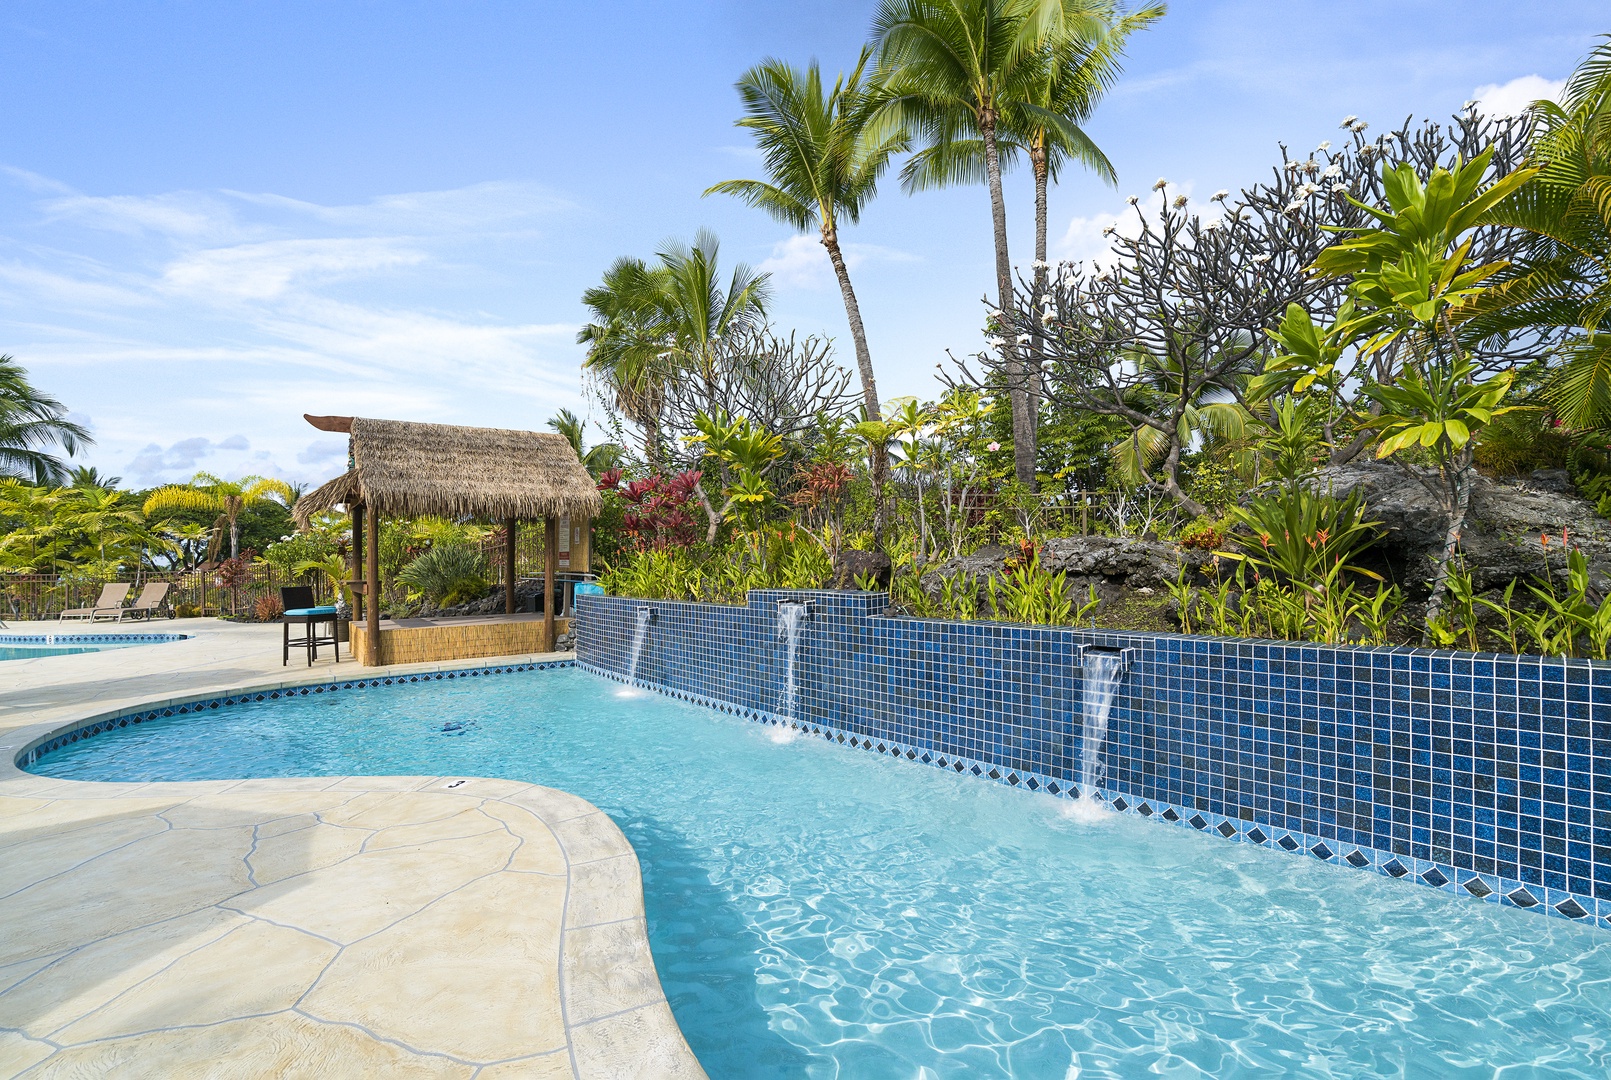 Kailua-Kona Vacation Rentals, Keauhou Resort 116 - The pool is surrounded by palm trees and sun beds